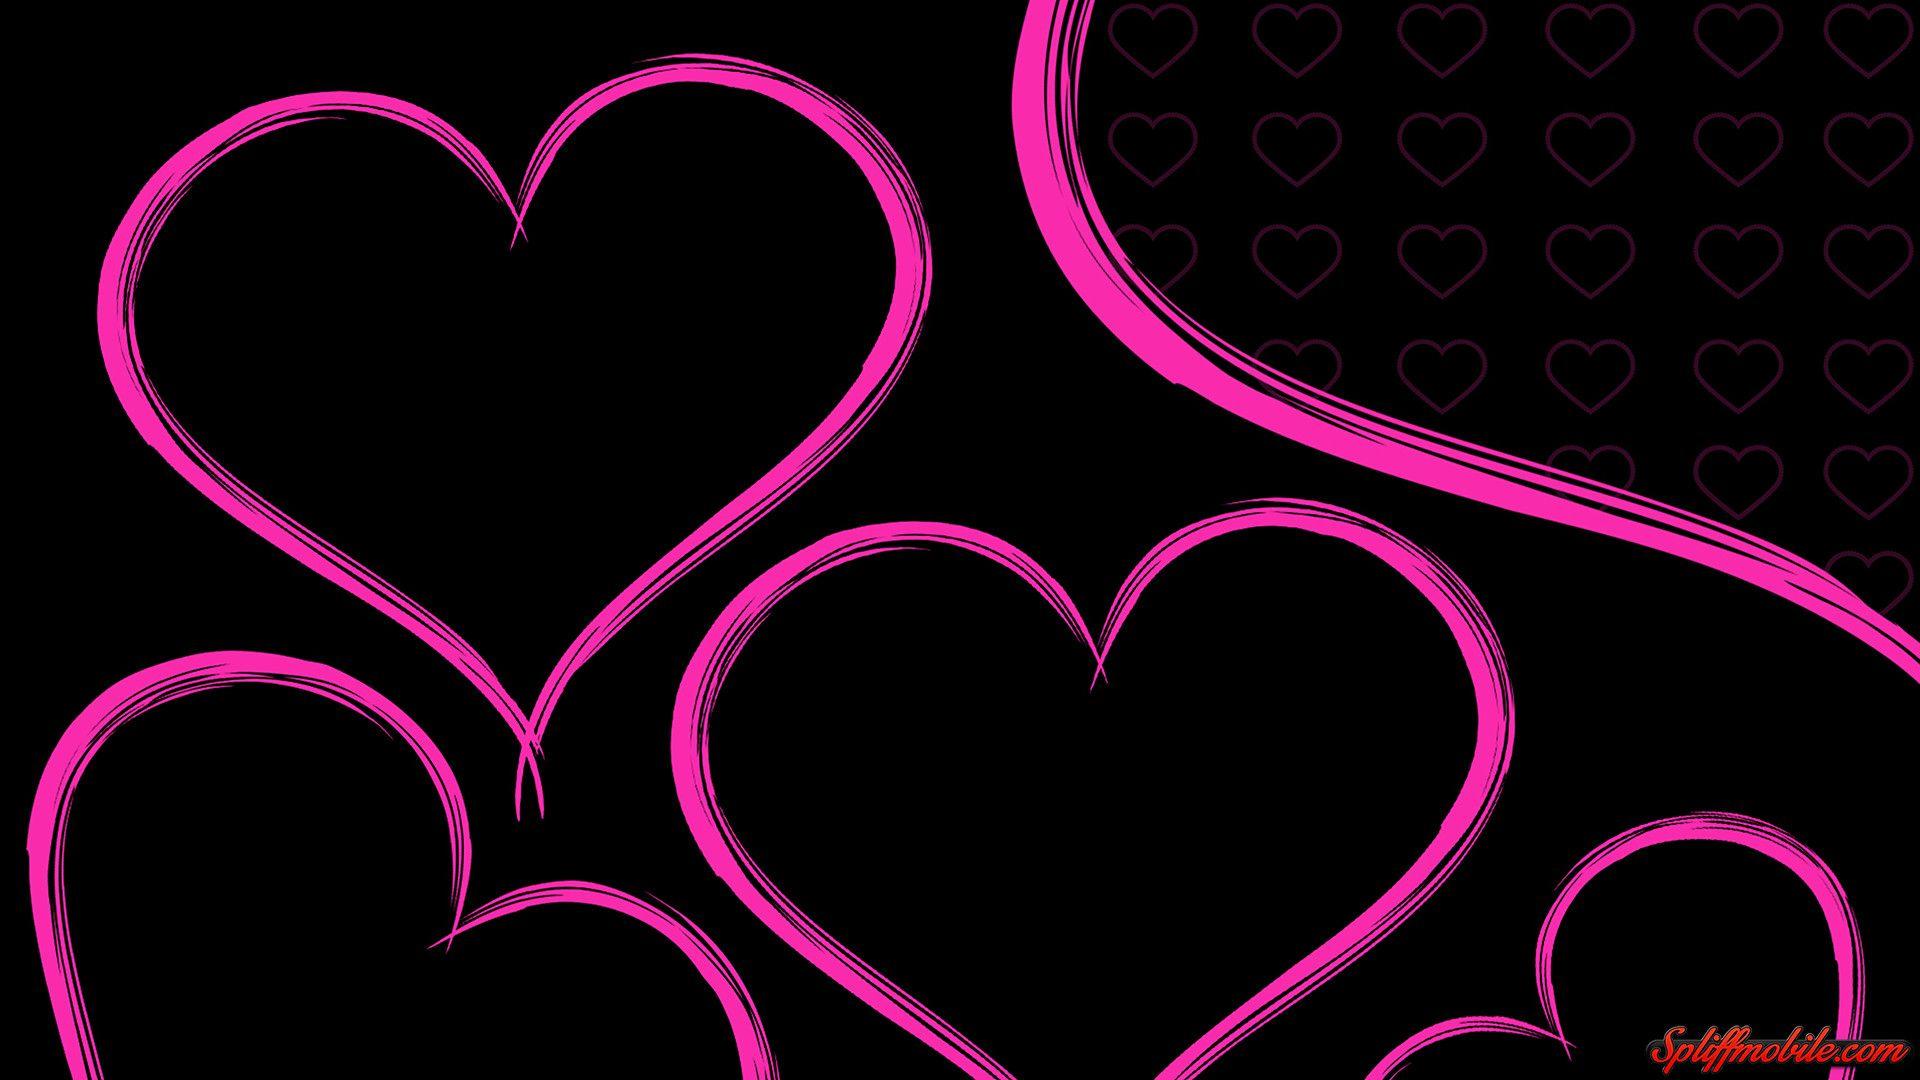 Black And Pink Heart Wallpapers - Top Free Black And Pink Heart